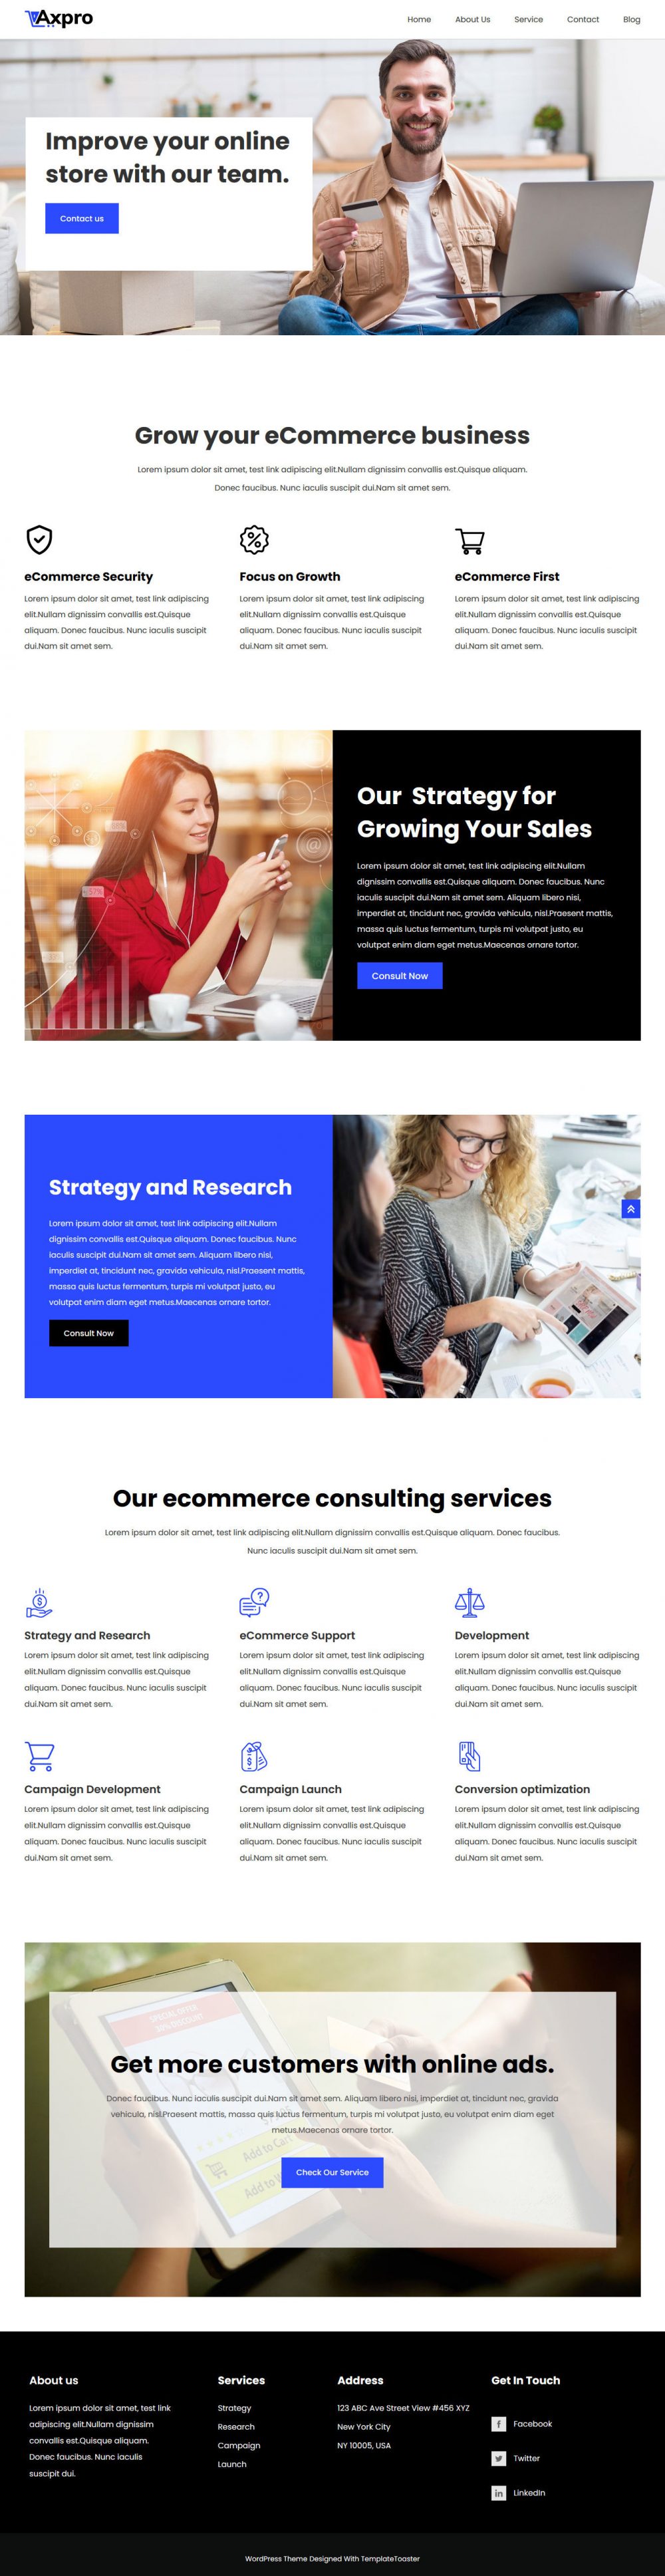 axpro ecommerce business consulting agency drupal theme